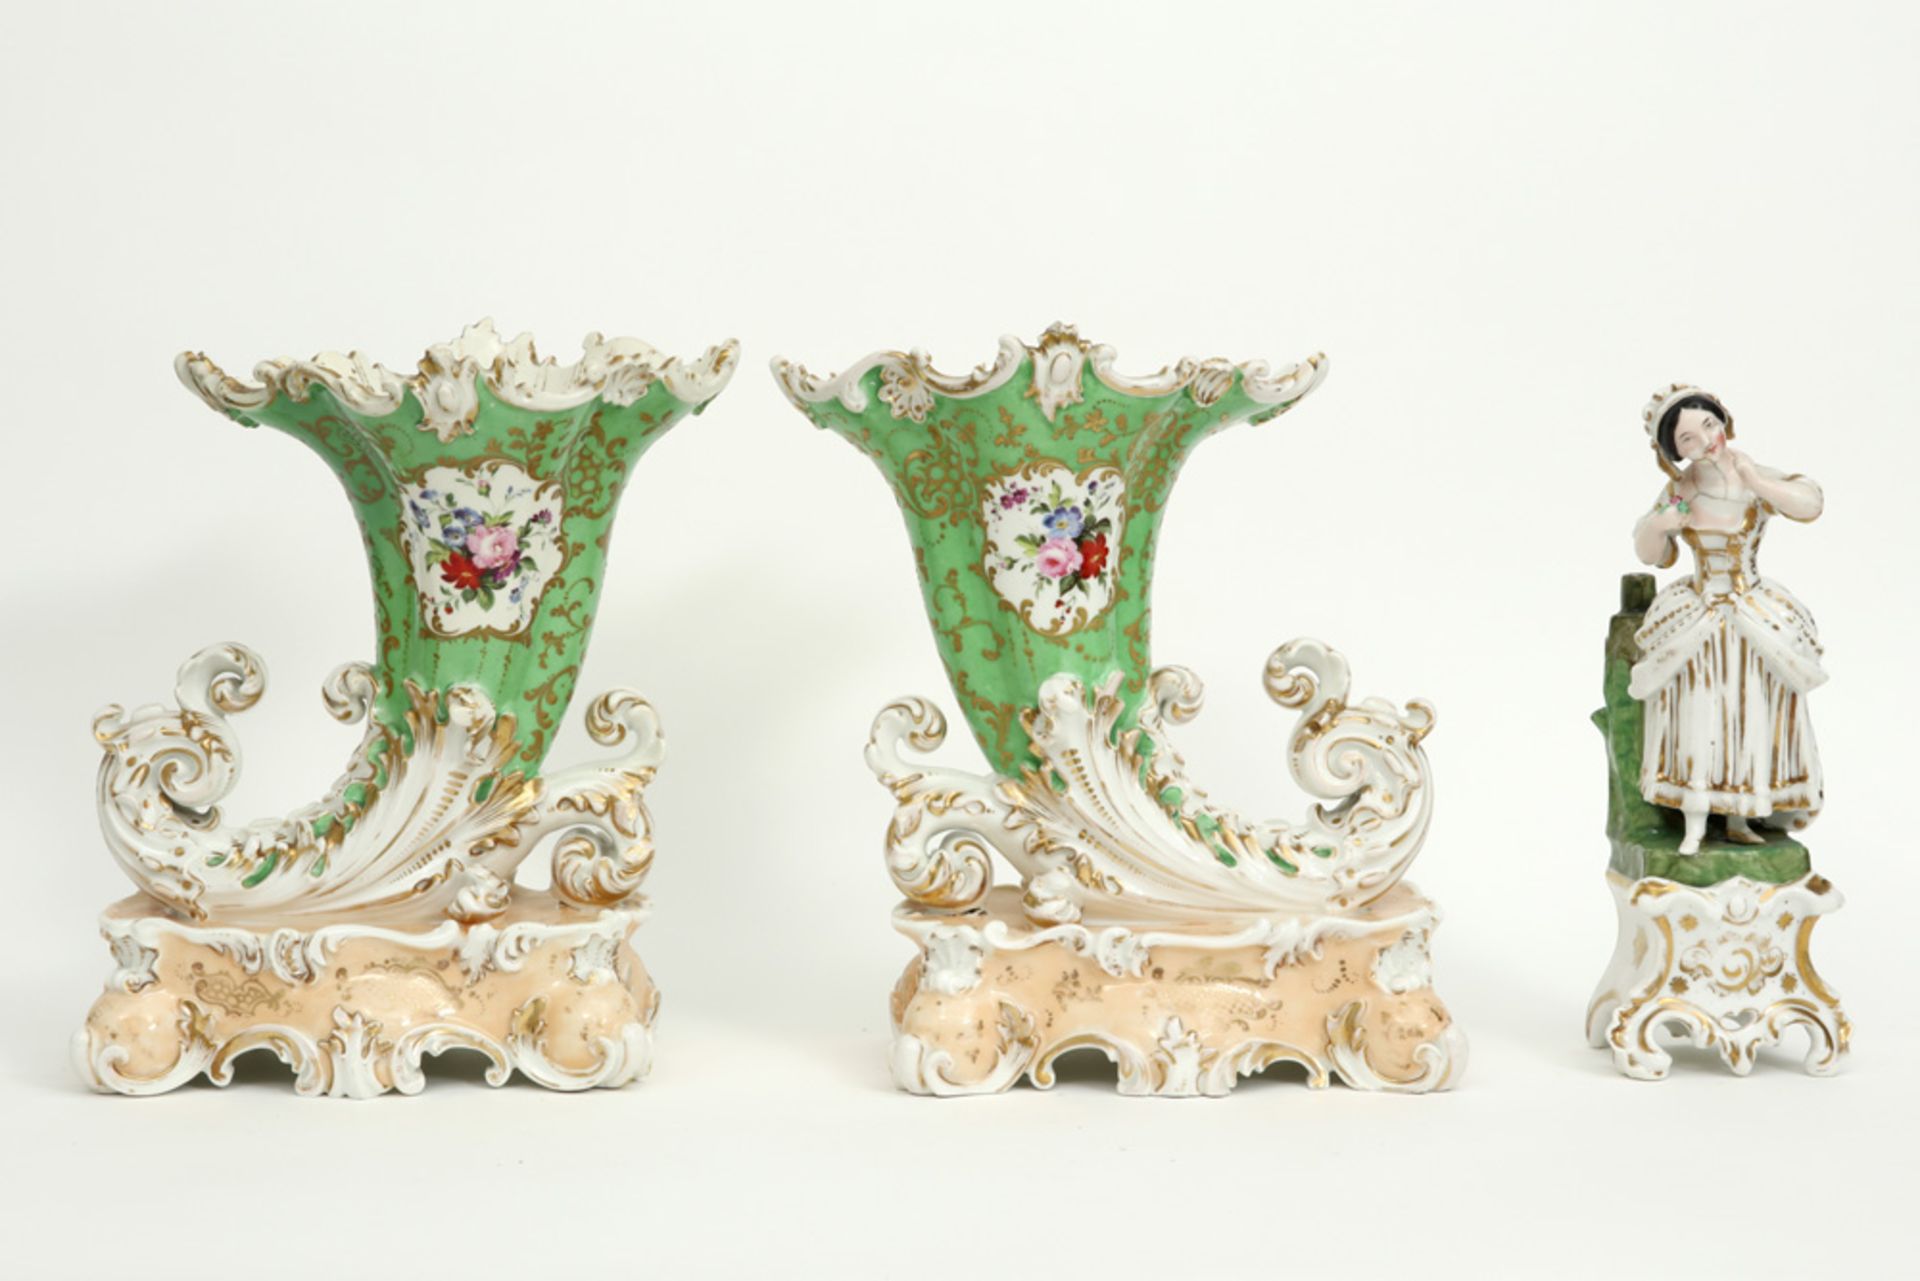 three pieces of antique French porcelain from Paris : a figure and a pair of vases